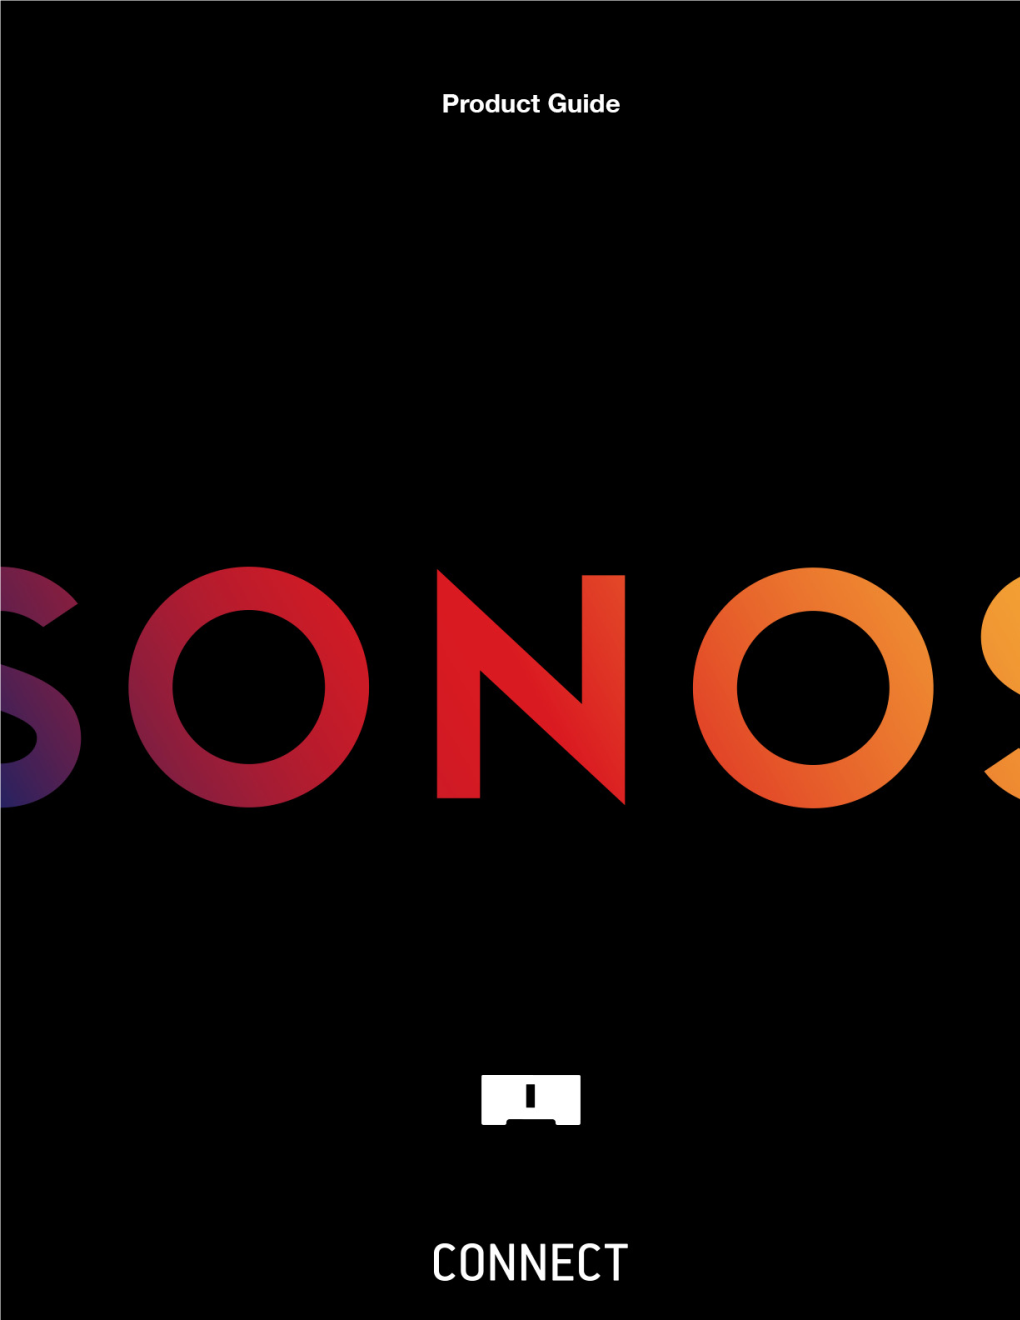 Sonos CONNECT the Sonos CONNECT™ Is Designed to Be Used with an External Amplifier